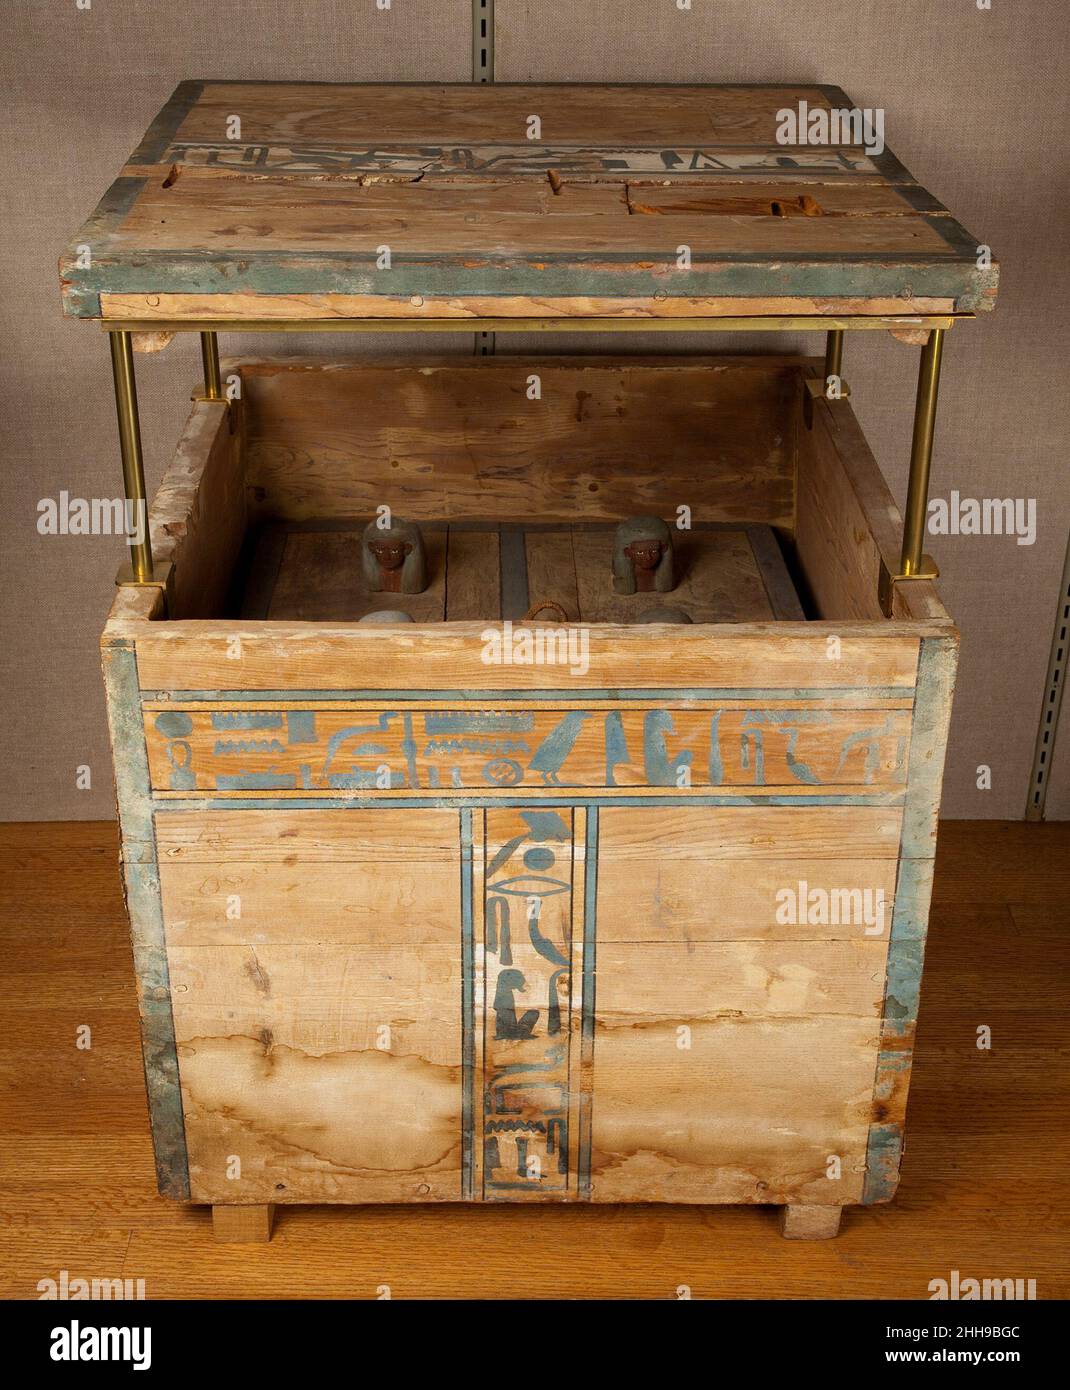 Canopic Chest of Senbi ca. 1961–1878 B.C. Middle Kingdom This canopic box was part of the burial equipment of the steward Senbi, which also included the Museum’s famous hippopotamus (nicknamed 'William' – see 17.9.1). The box is inscribed with recitations of the four sons of Horus and invocation of offerings in the name of Anubis. The inner lid is surmounted by four wooden heads representing the four sons of Horus, the guardians of the viscera.. Canopic Chest of Senbi. ca. 1961–1878 B.C.. Wood (ziziphus sp.), paint, string. Middle Kingdom. From Egypt, Middle Egypt, Meir, Tomb B3 of the nomarch Stock Photo